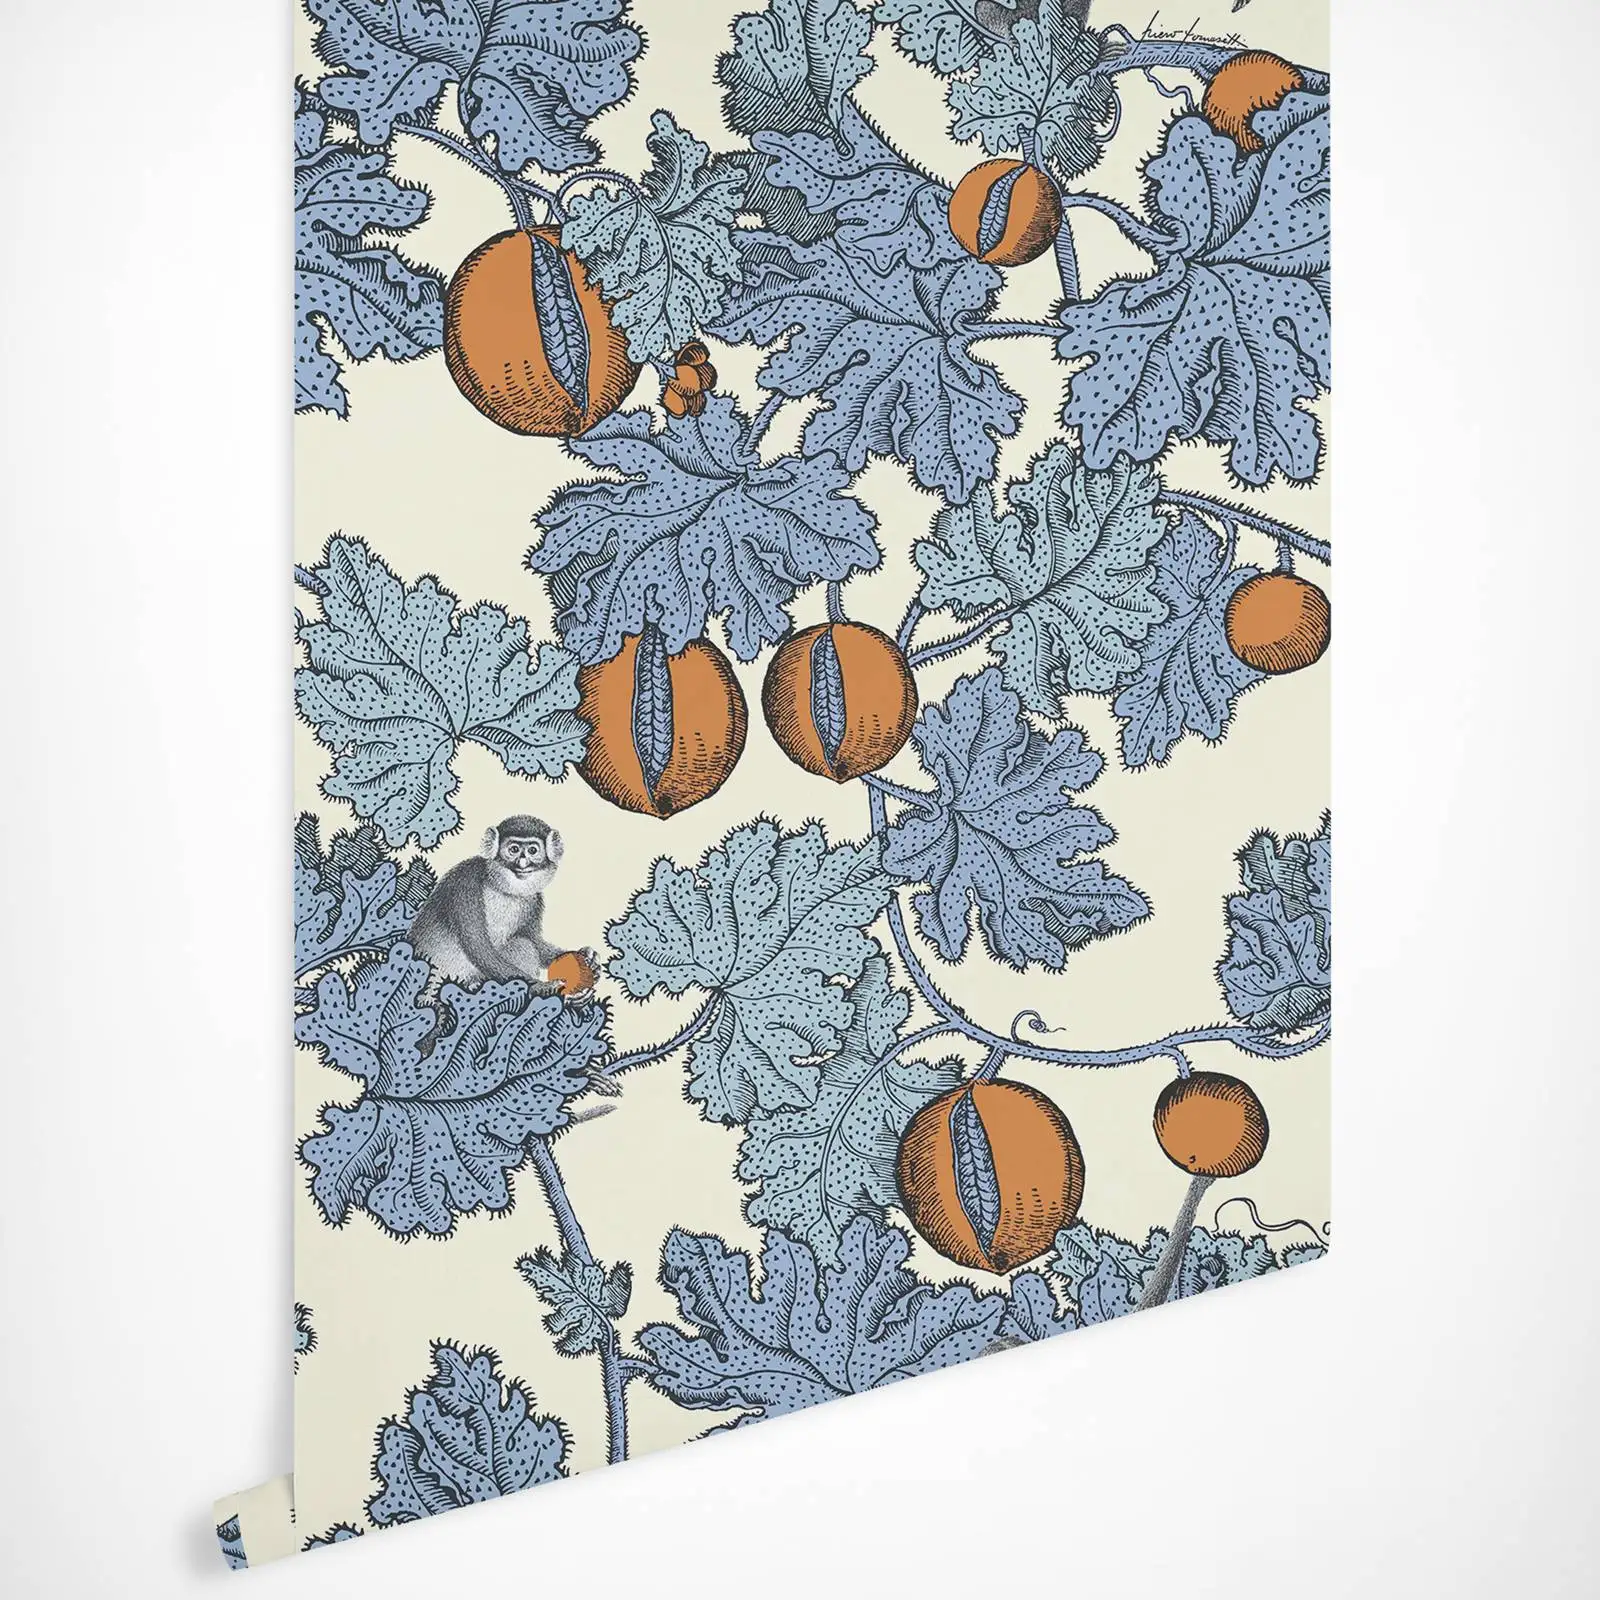 Monkeys and fruit Wall Paper, Frutto Proibito Blue and Orange  Wallpape, Scandinavian design, removable Wallpaper